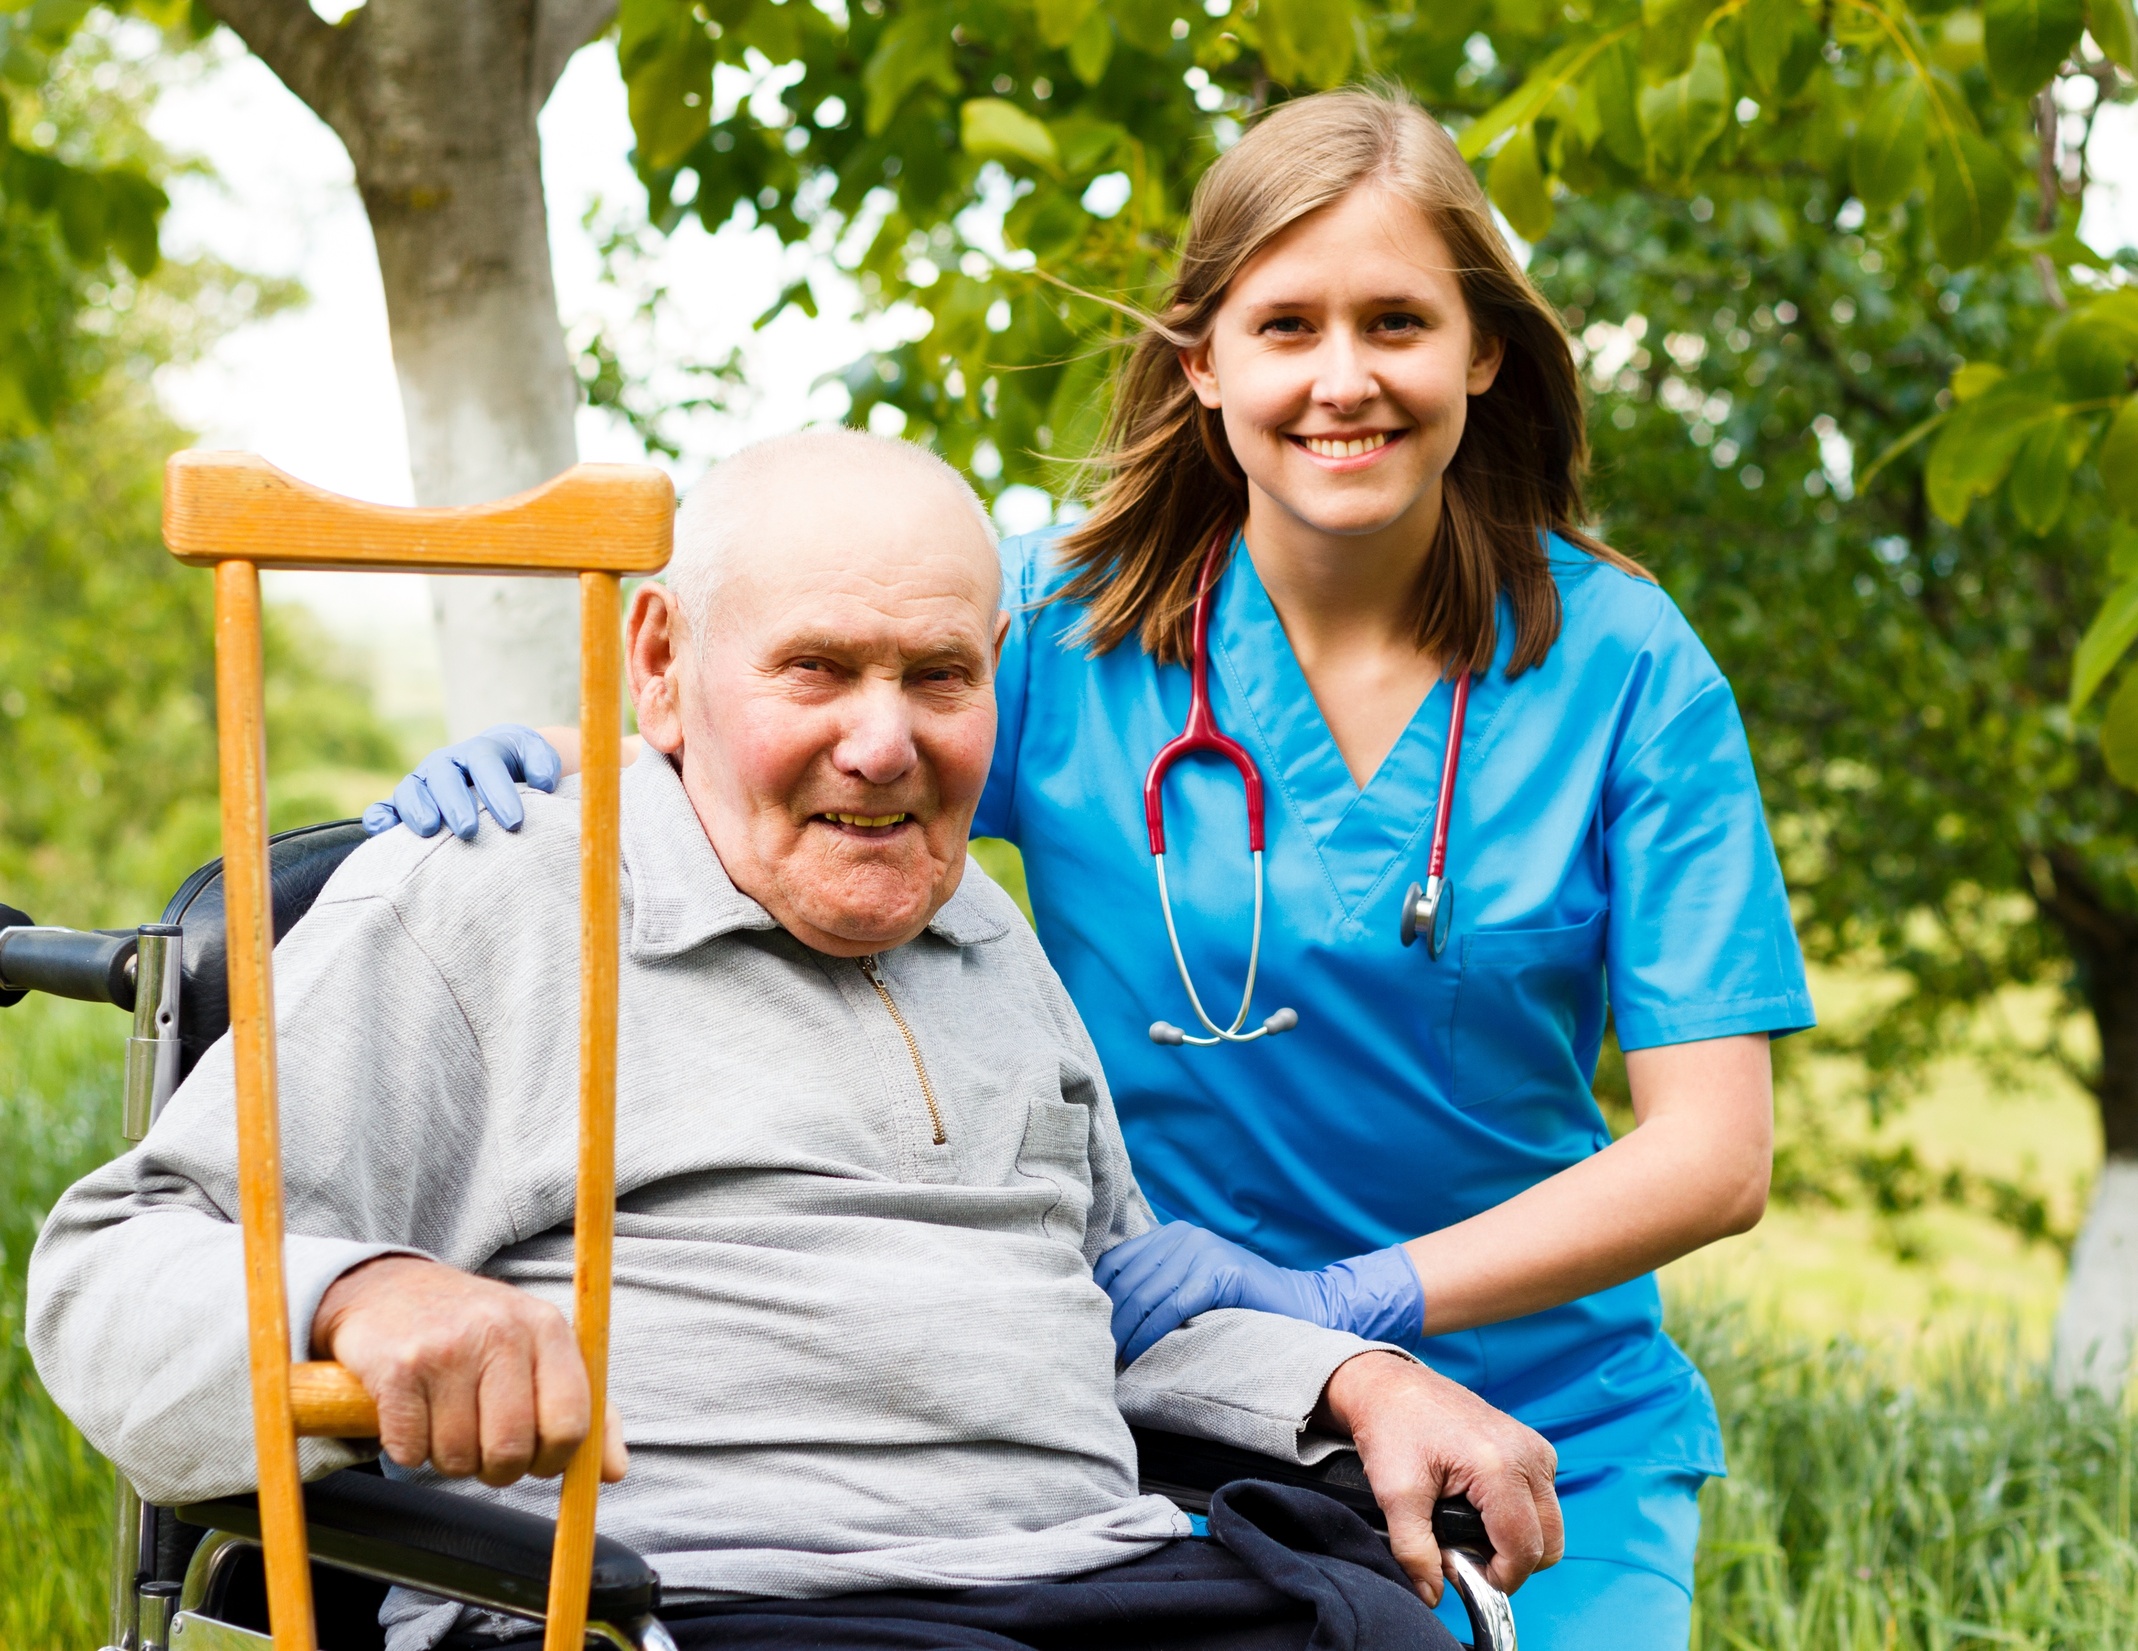 HOME HEALTH CARE IN MIAMI FL ALLOWS LOVED ONES TO REMAIN INDEPENDENT